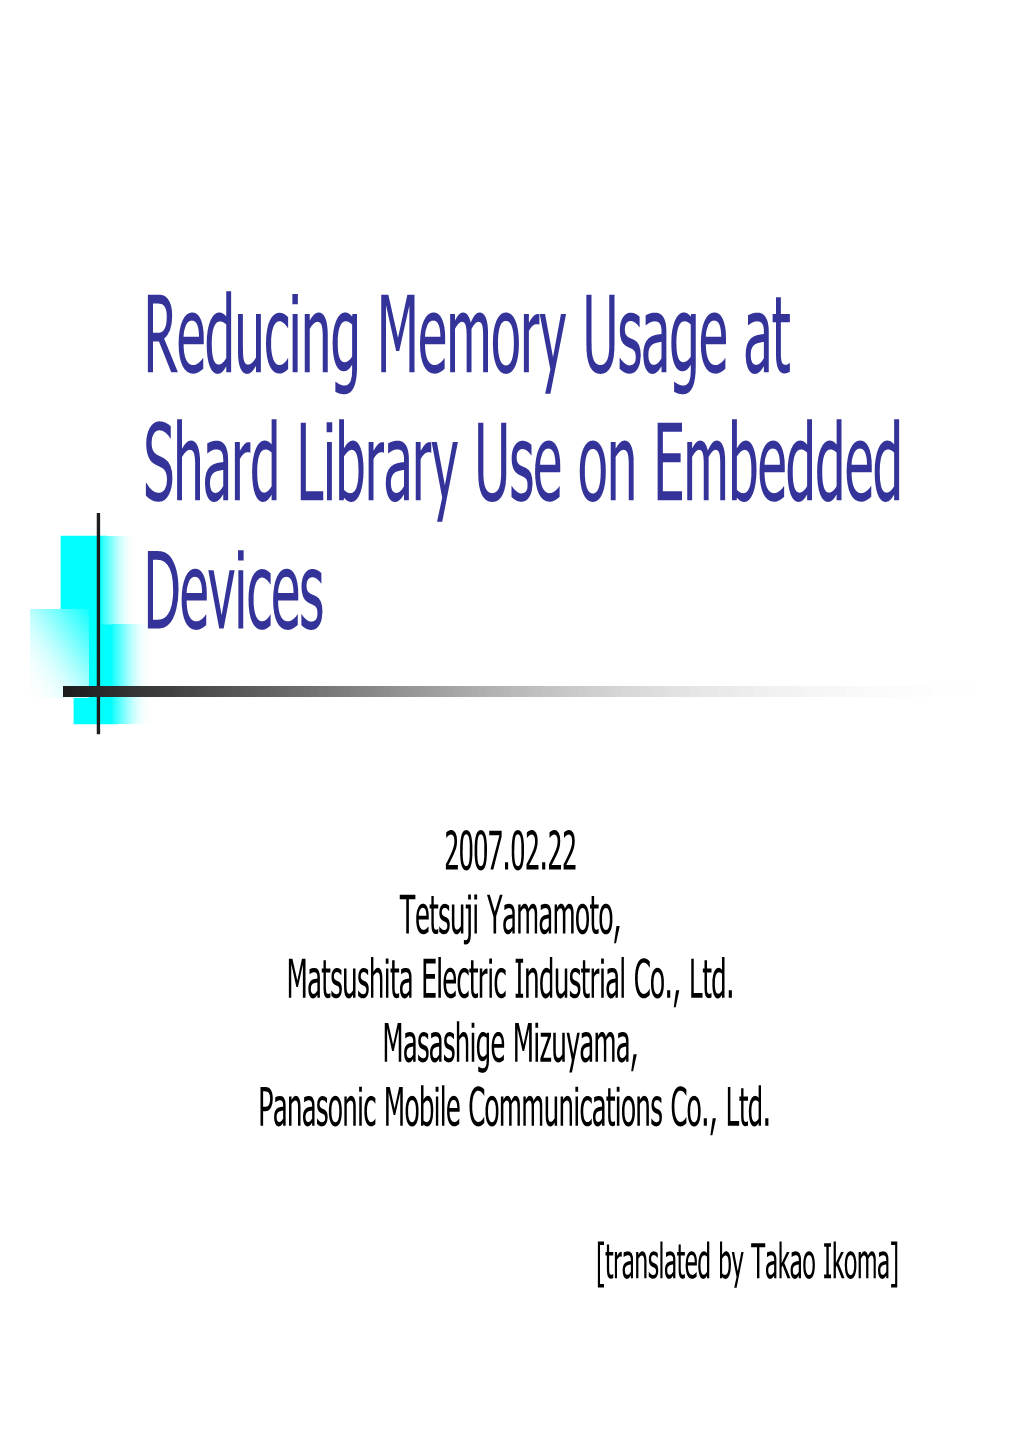 Reducing Memory Usage at Shard Library Use on Embedded Devices